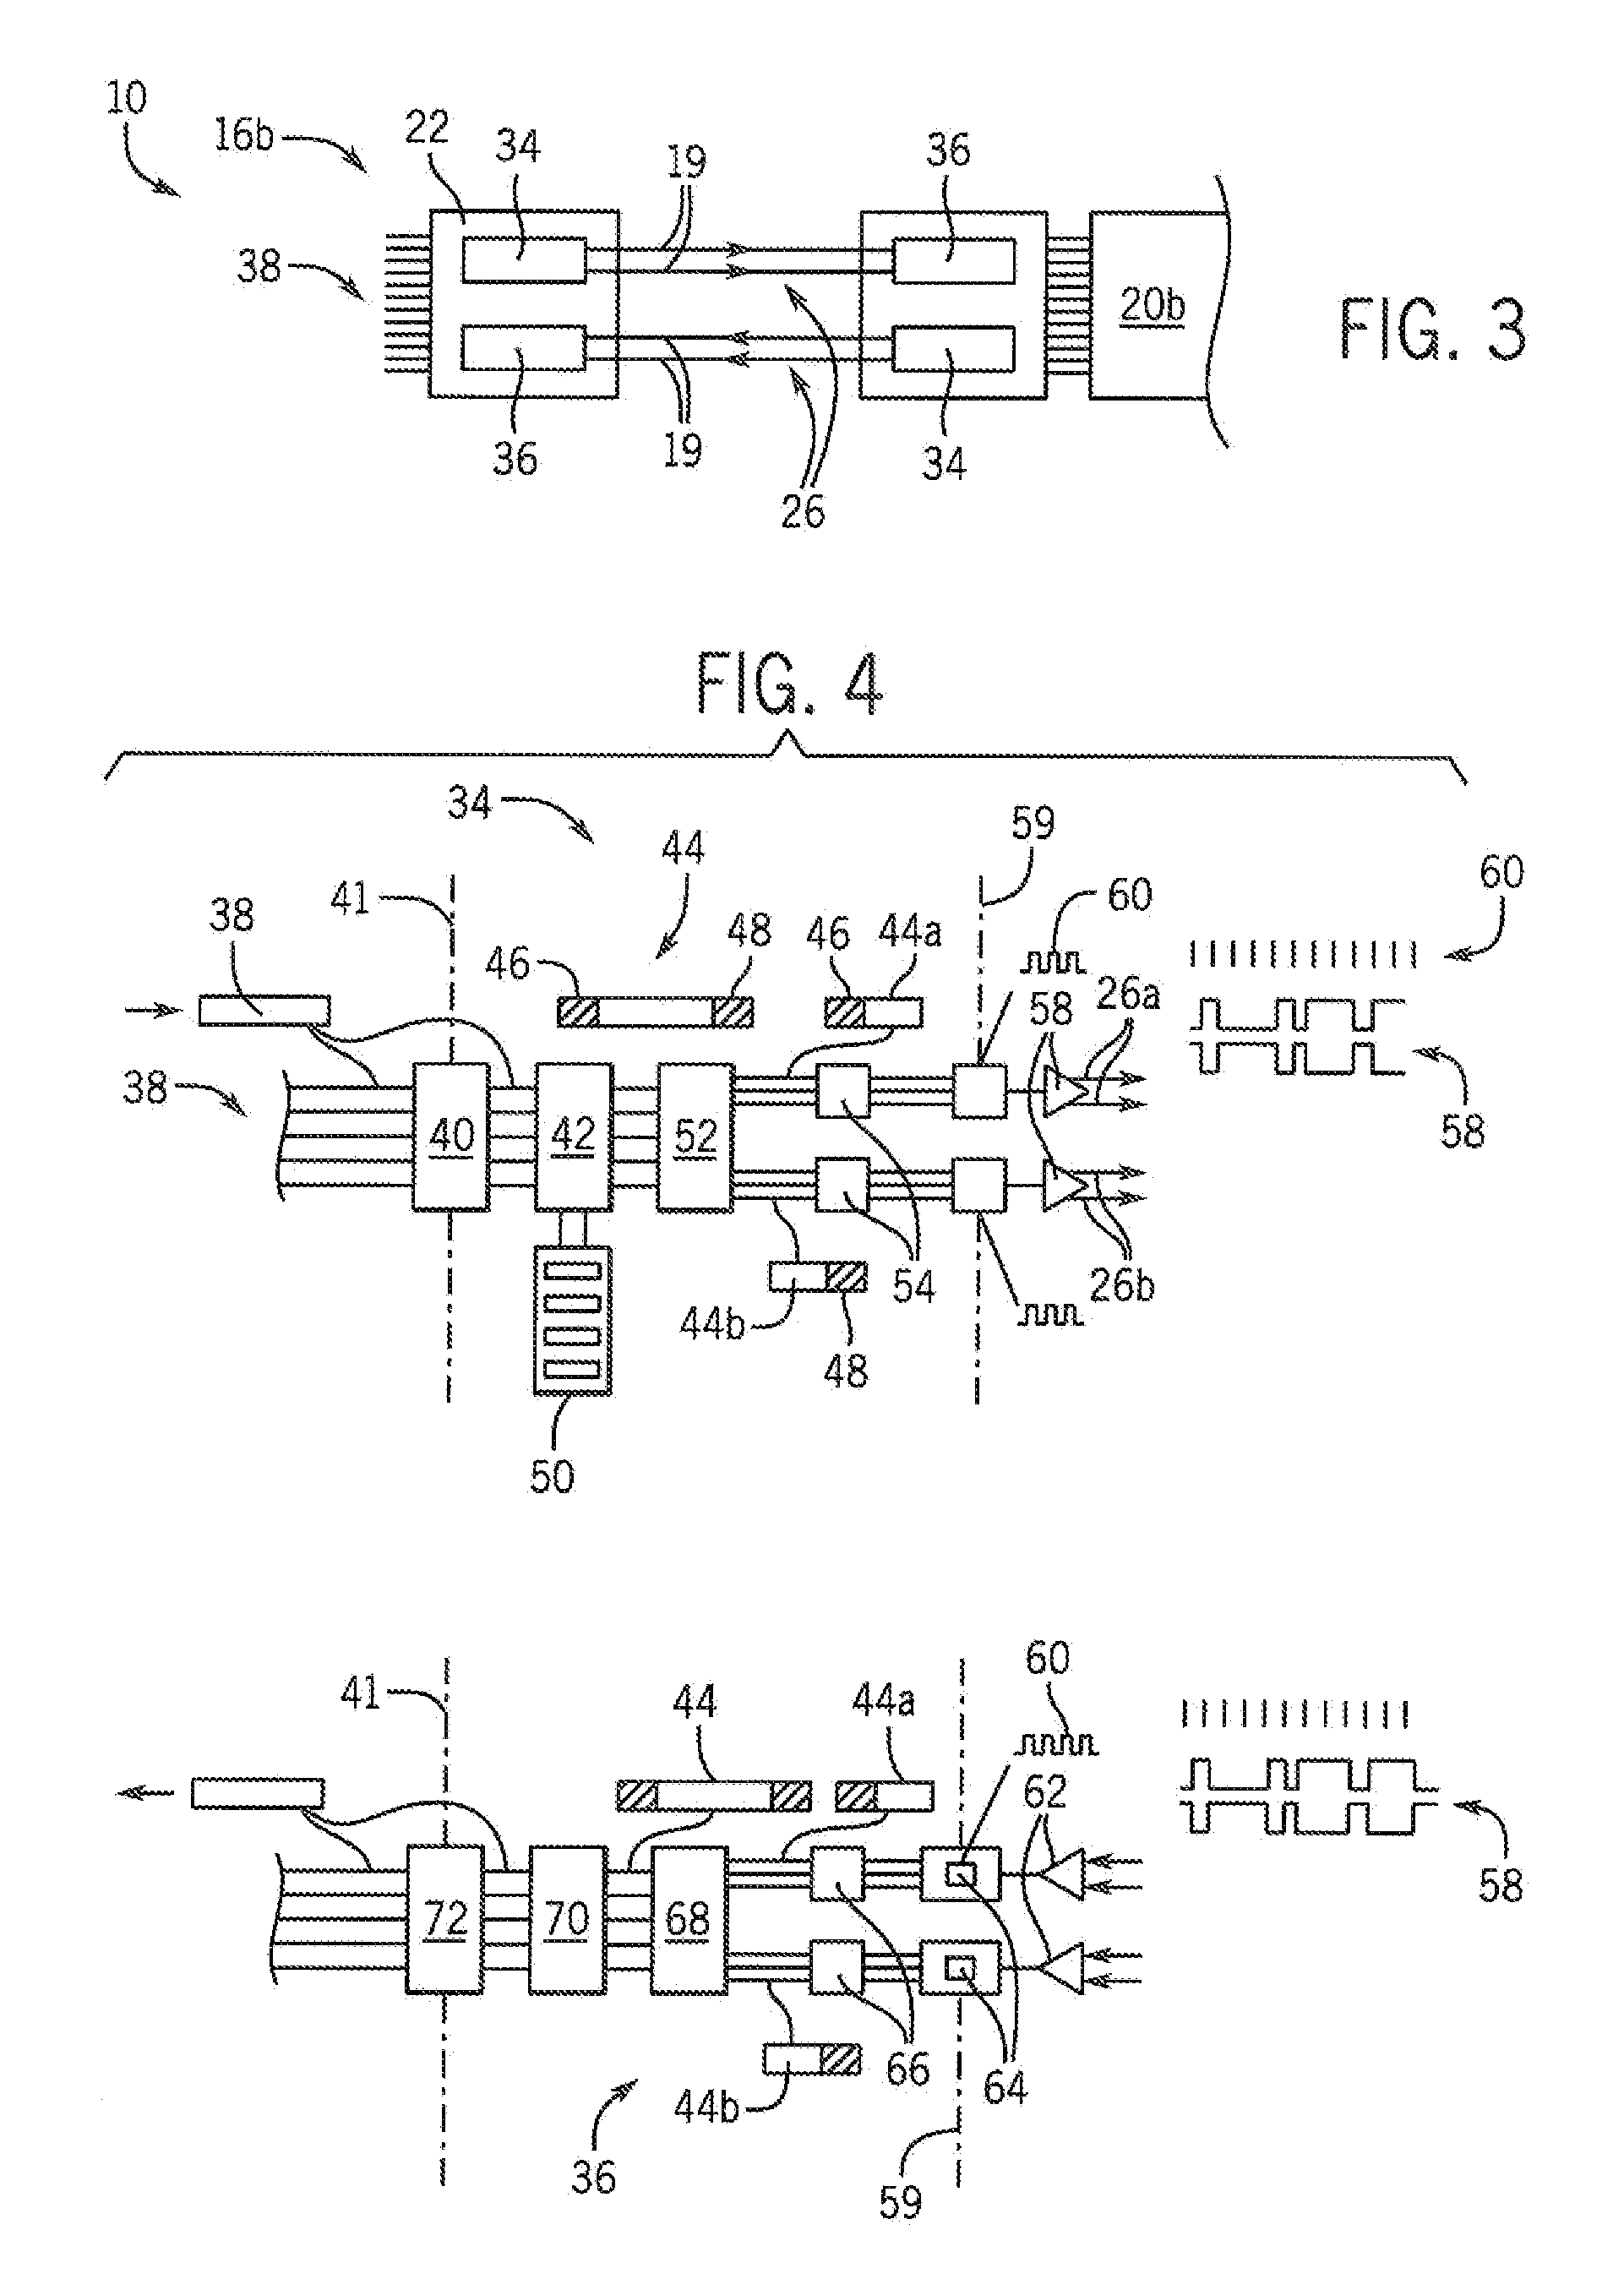 Computer architecture having selectable, parallel and serial communication channels between processors and memory